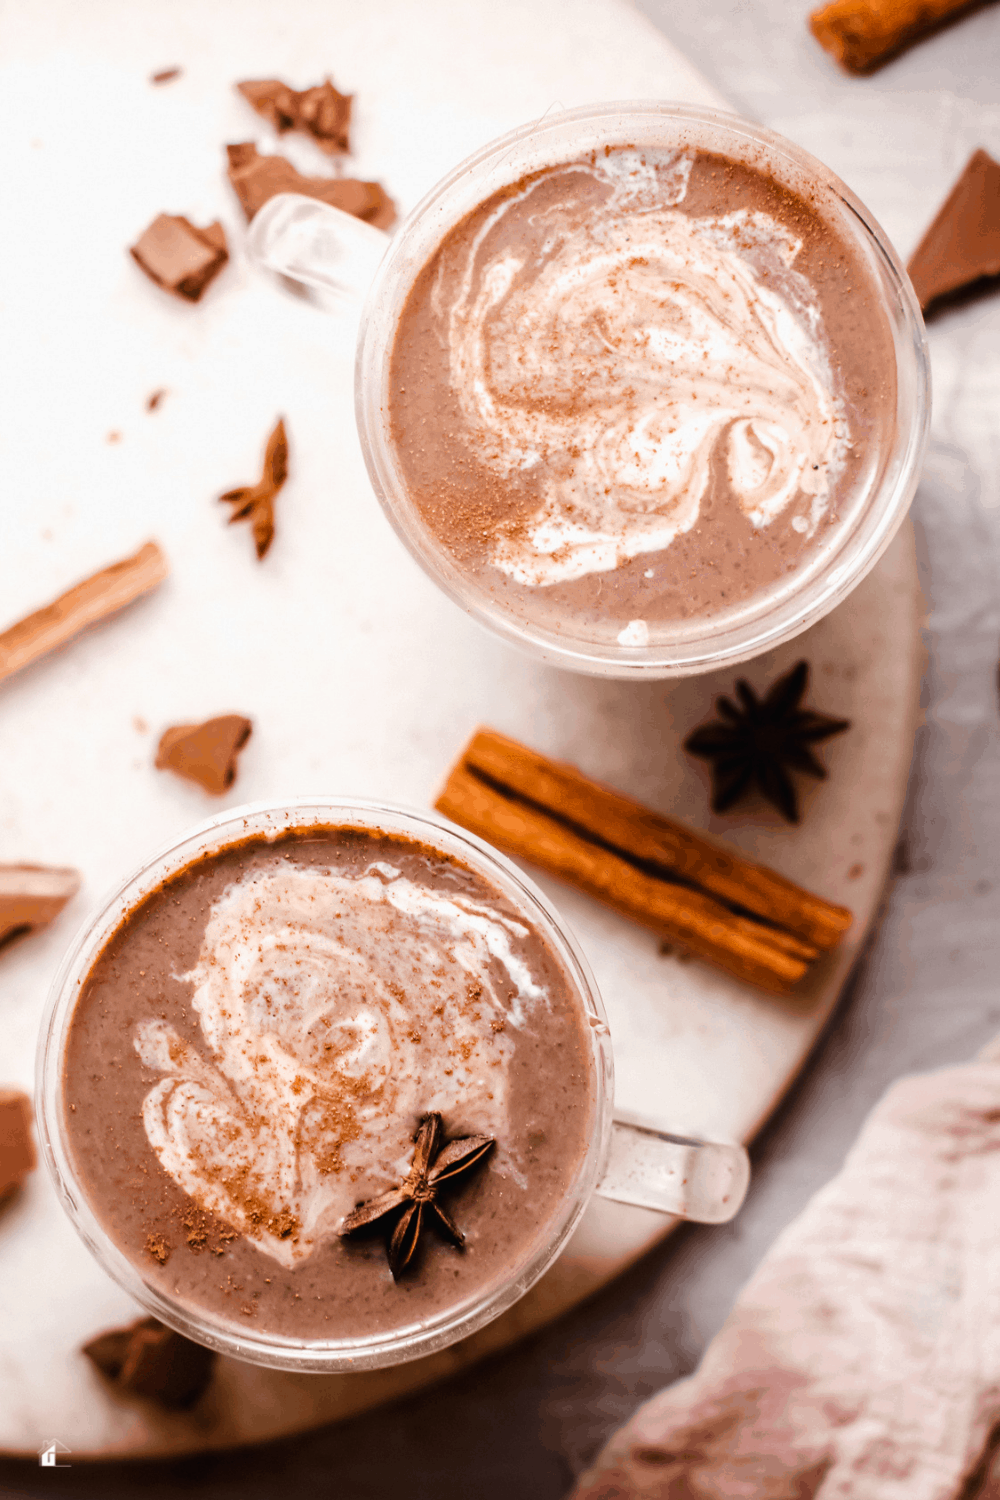 Authentic hot chocolate is not like the hot chocolate we know. This Champurrado recipe is the best and easy to make. Learn how here. via @mystayathome